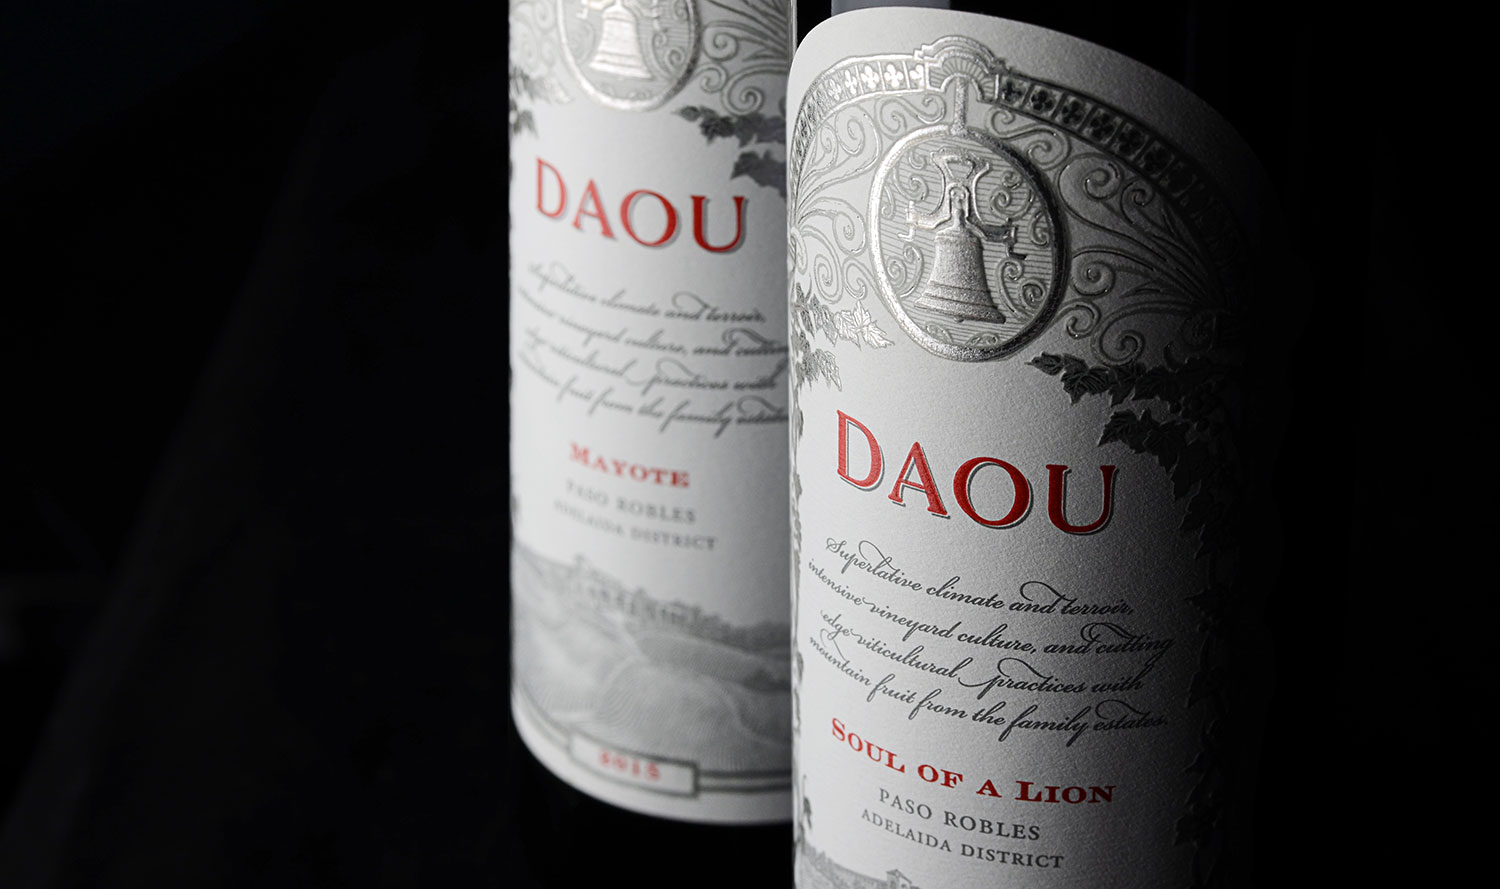 Daou Vineyards & Winery